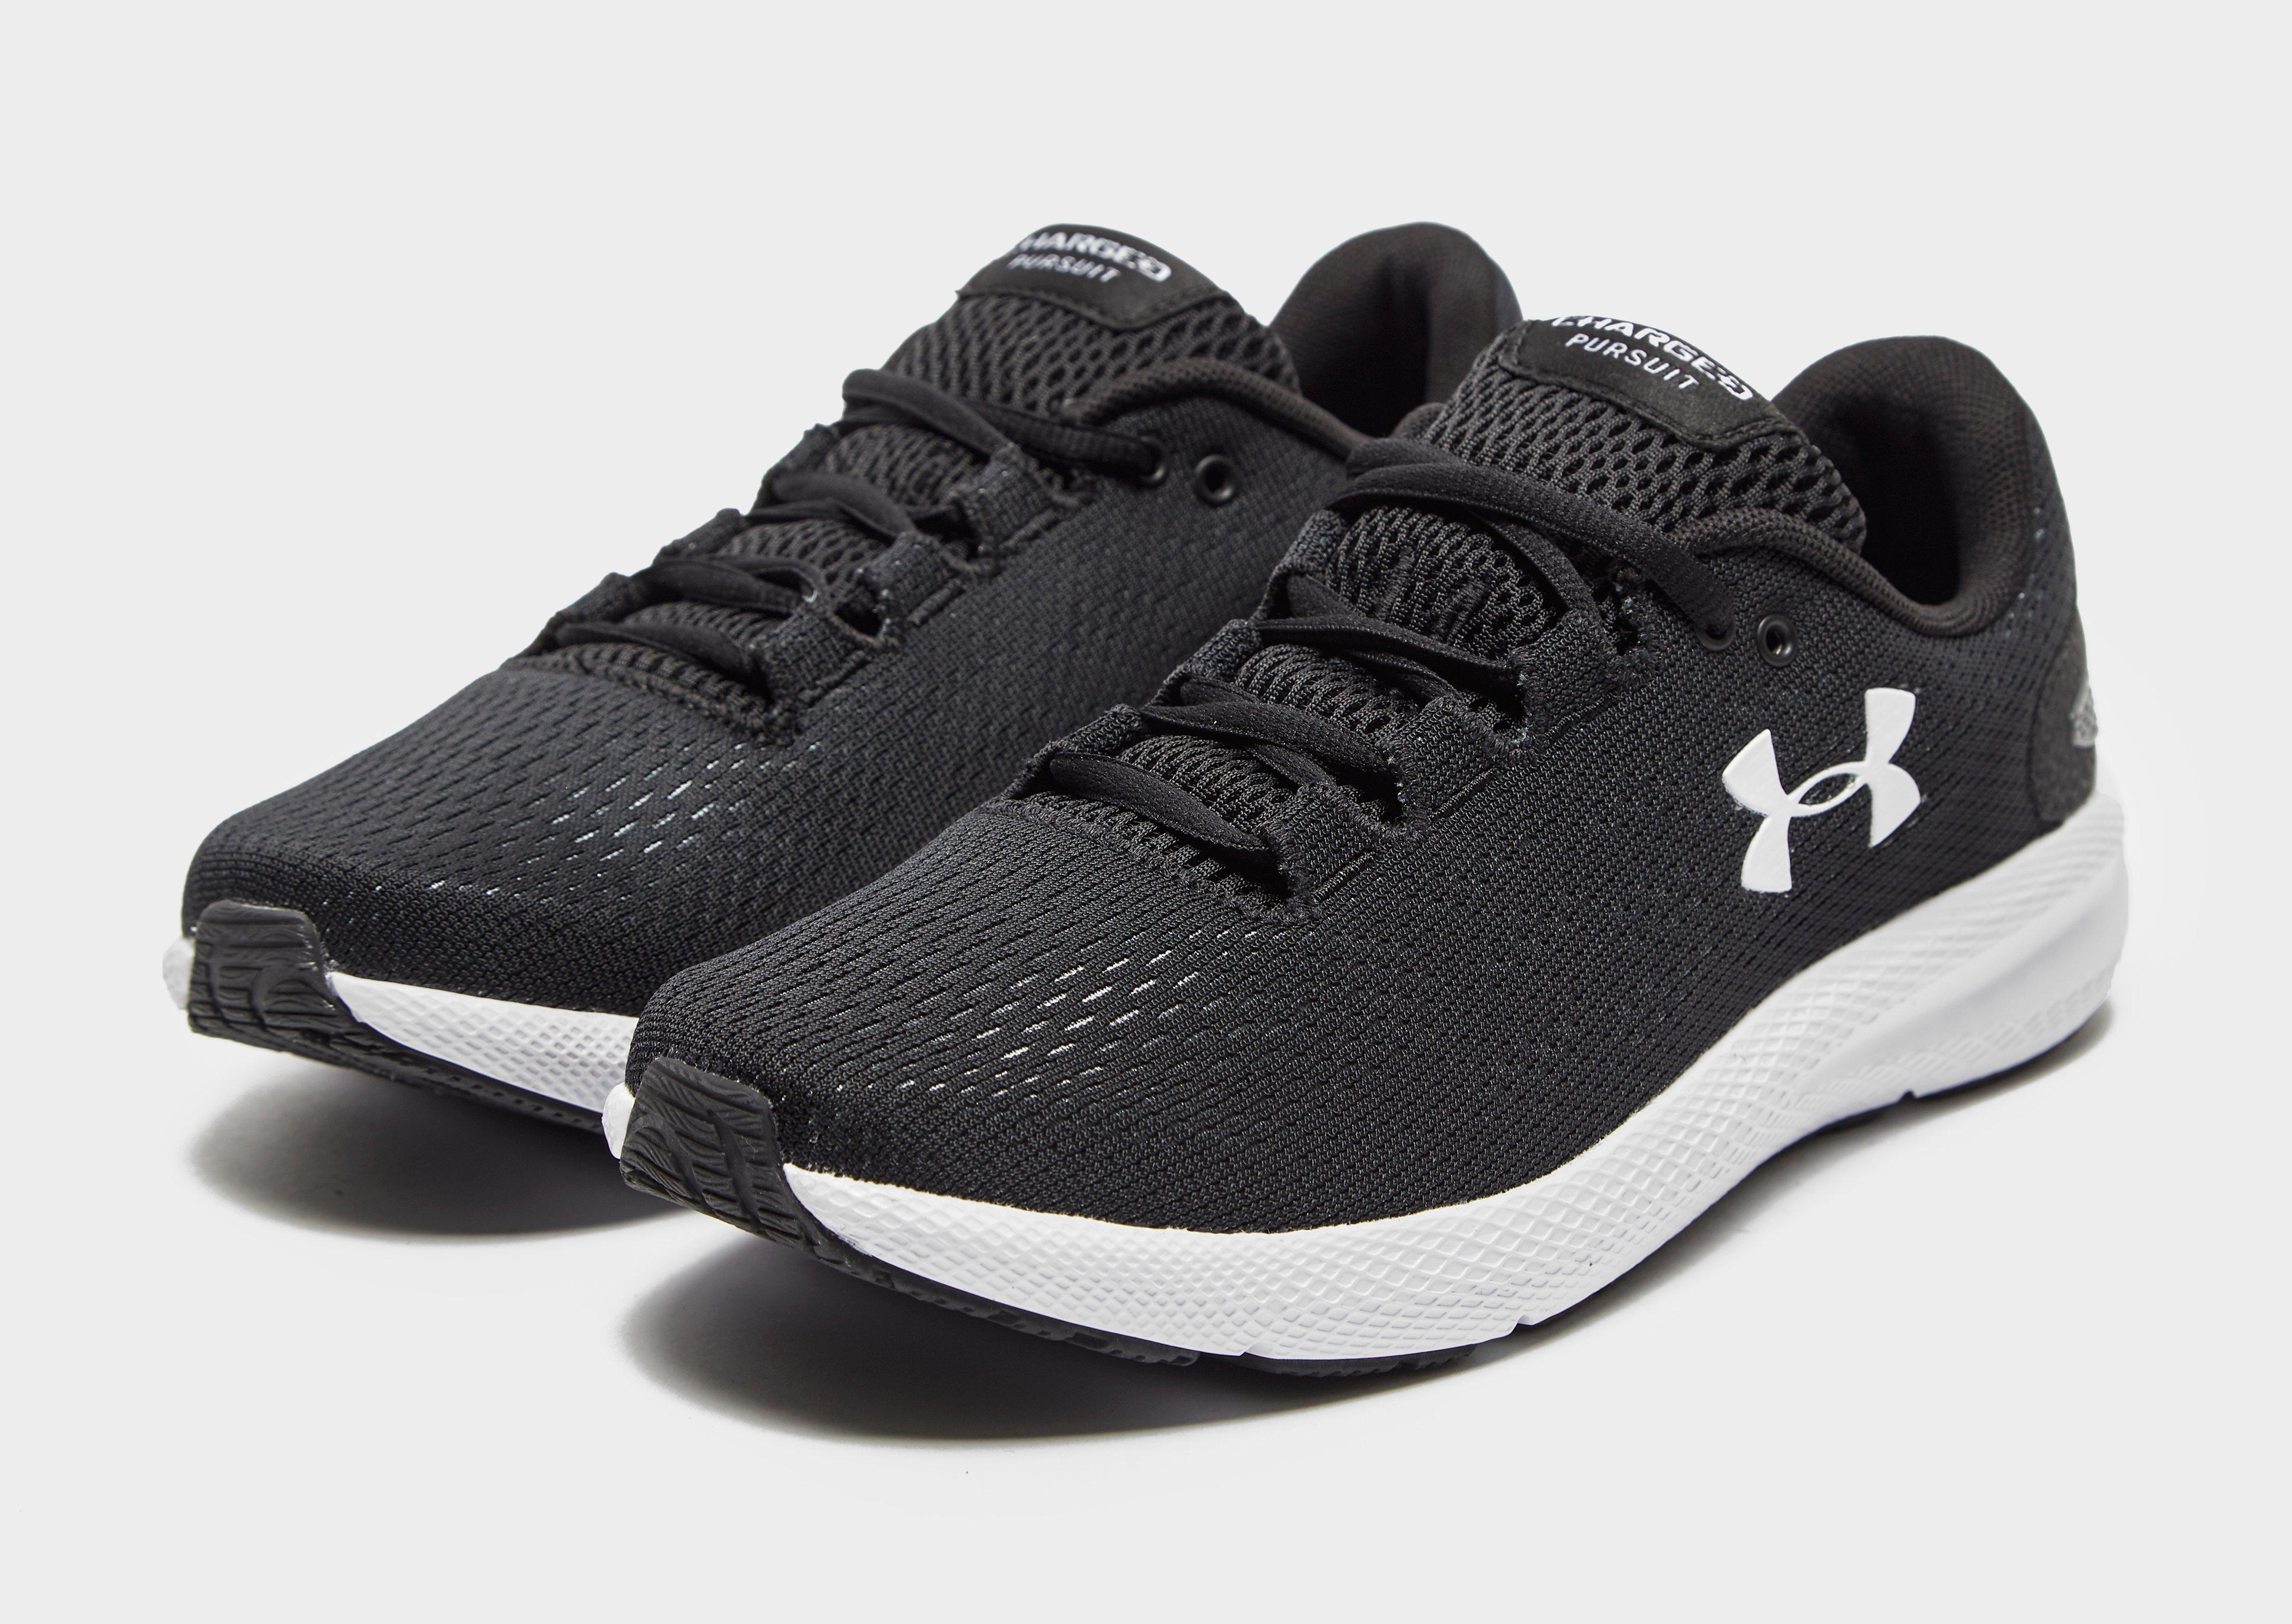 under armour black trainers